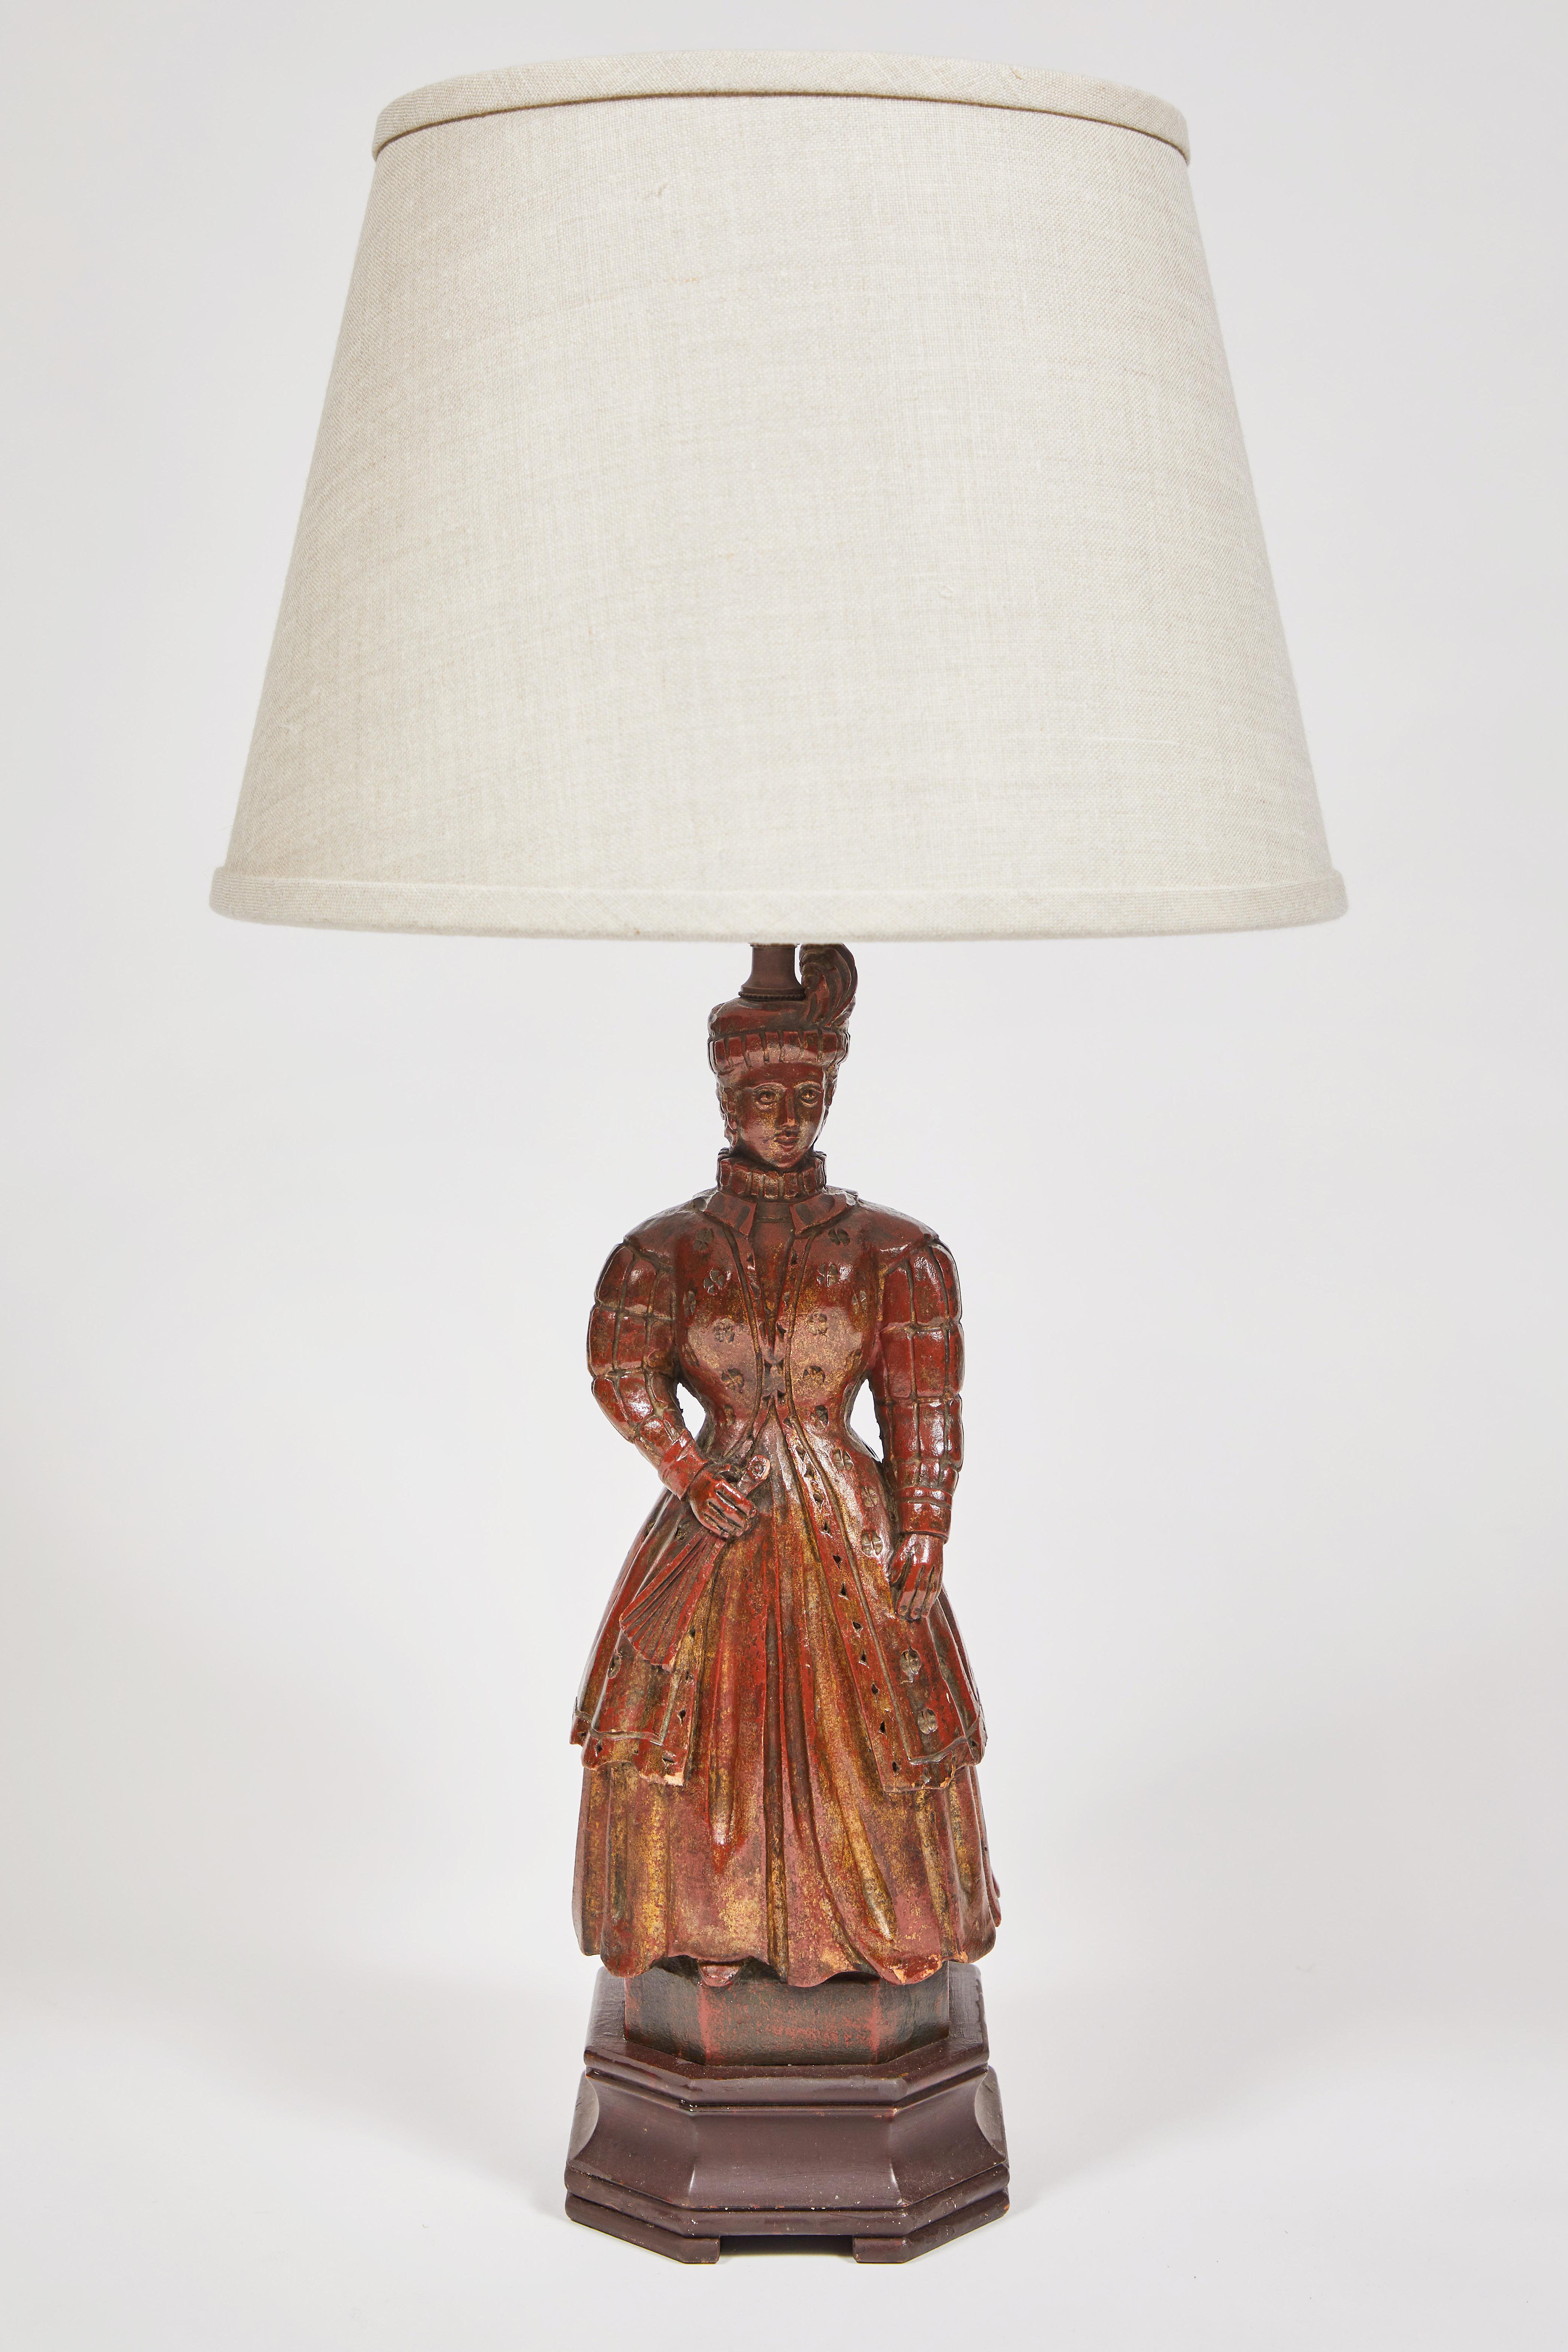 Hand-Carved Vintage Hand Carved Wooden Lamp of an Elizabethan Lady with Fan